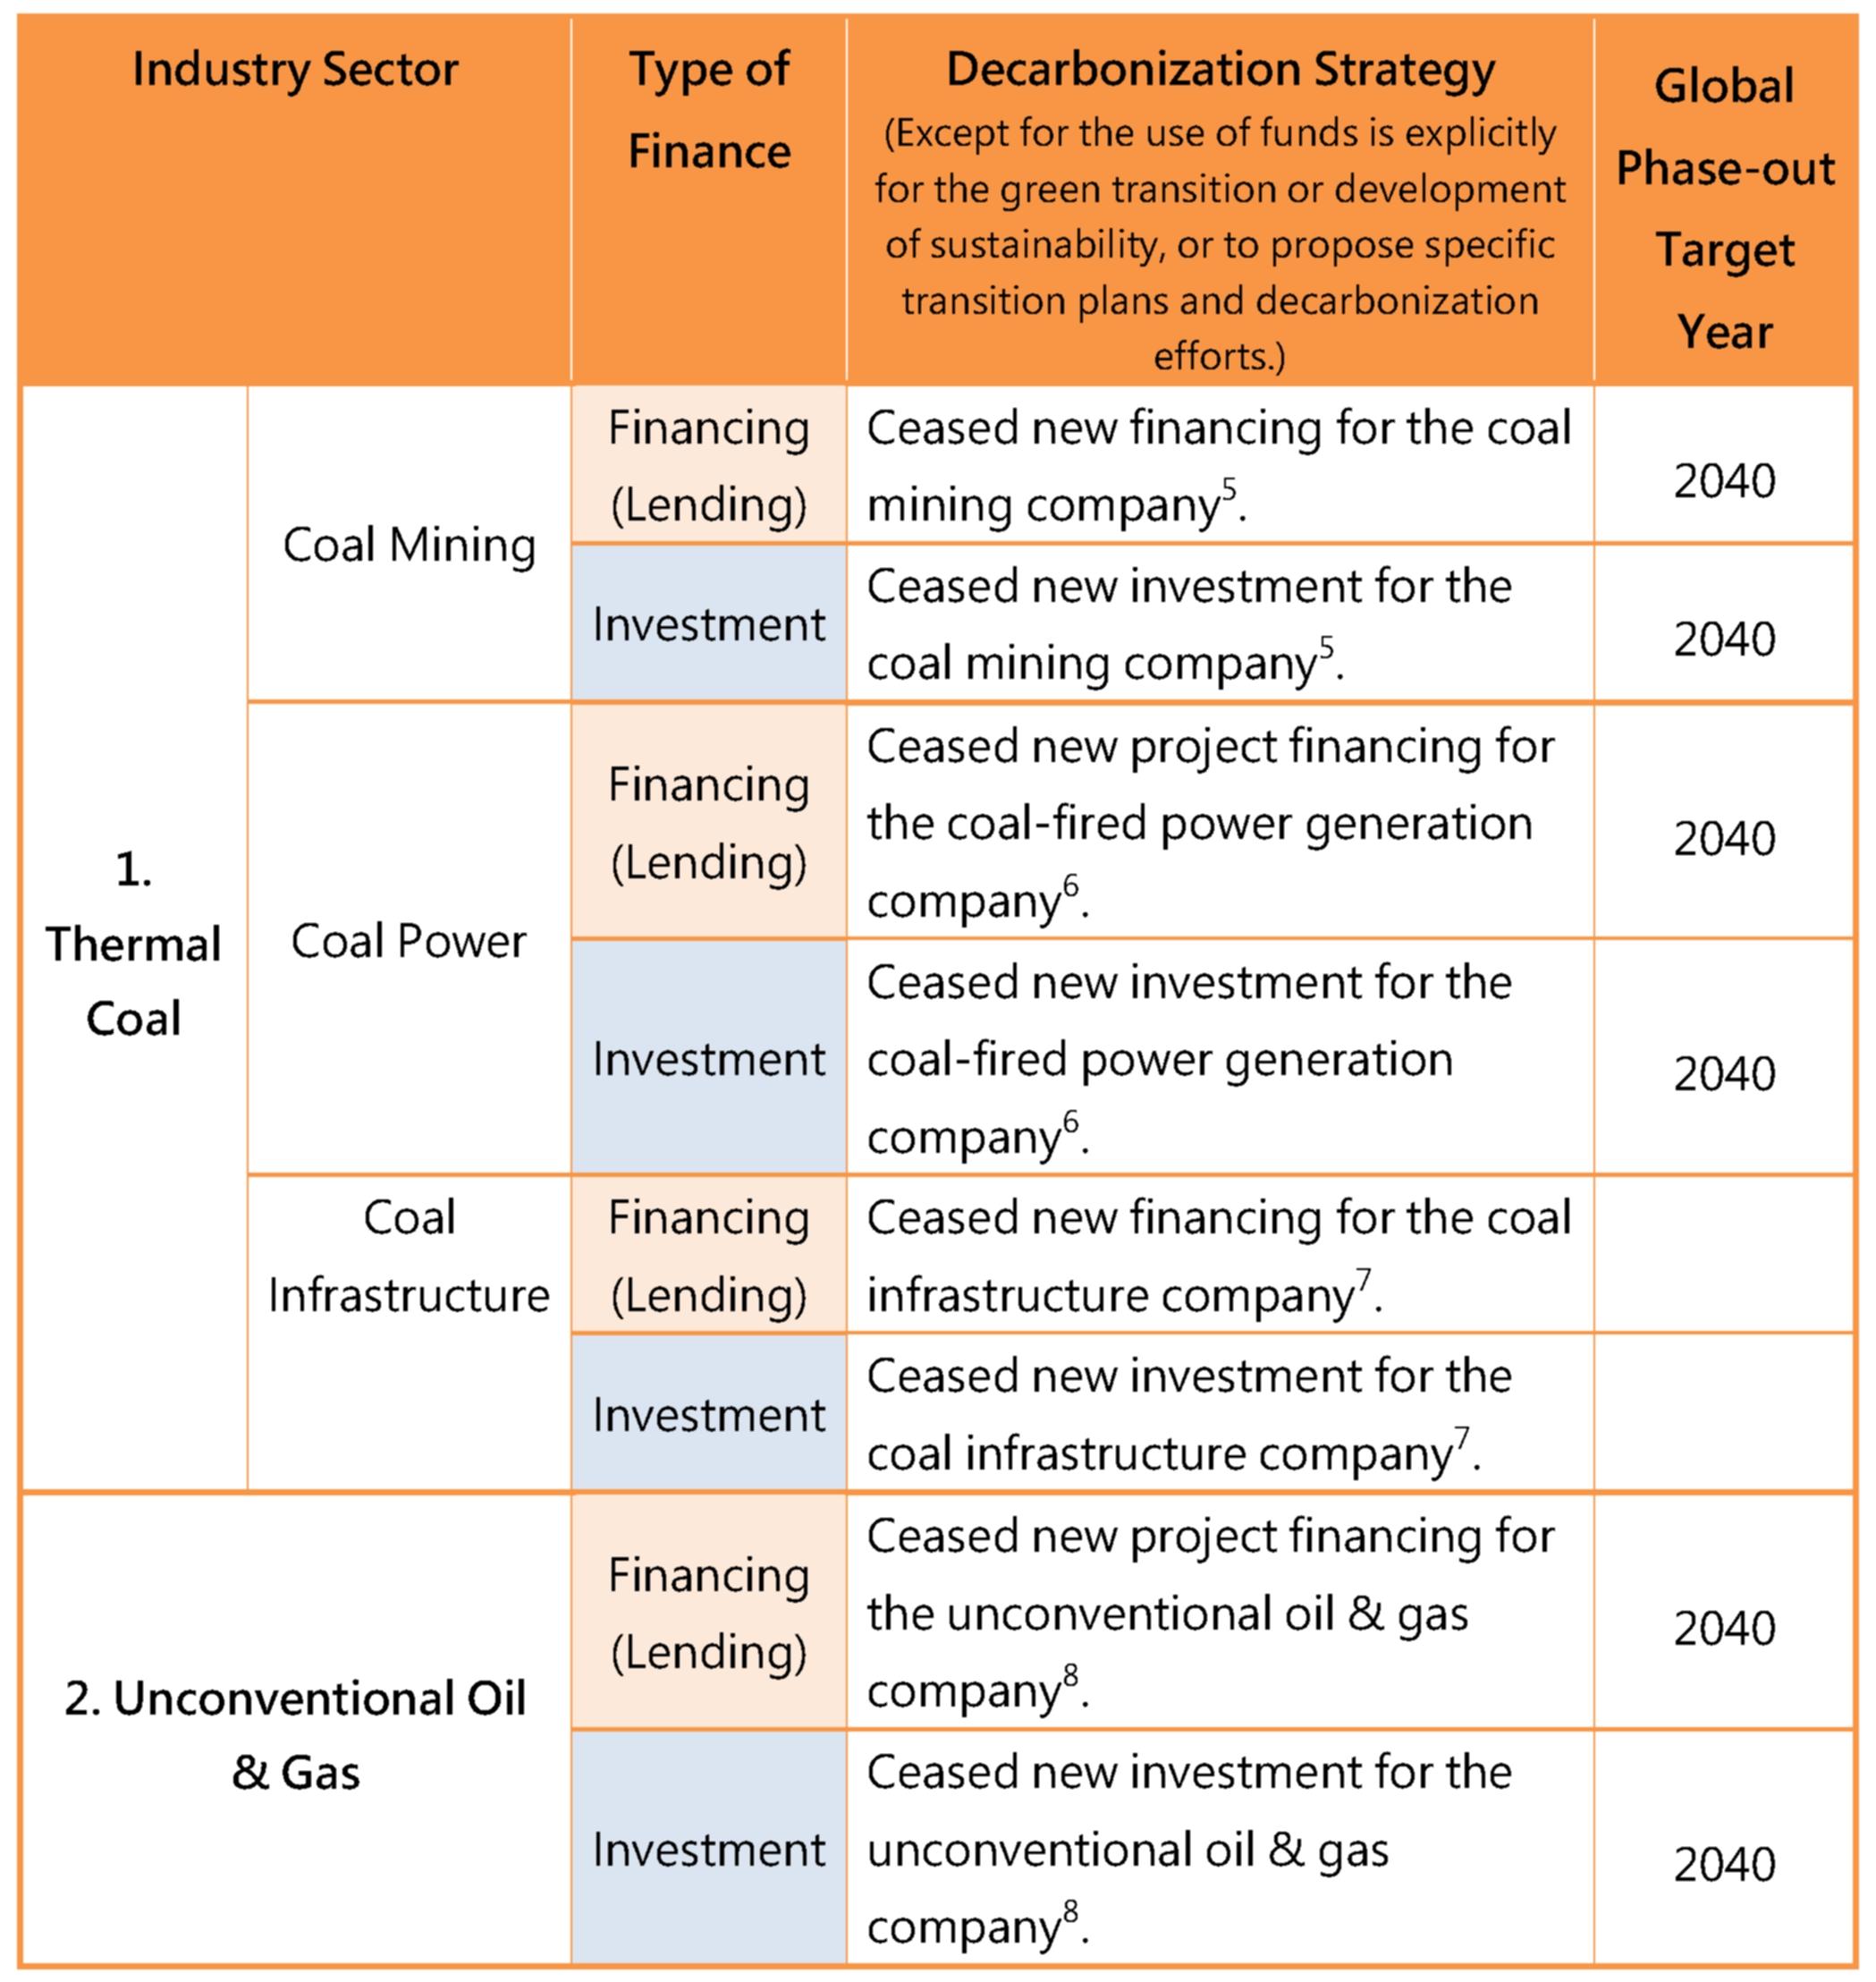 Gradually reduce investment and financing positions in industries related to coal and unconventional oil and gas.